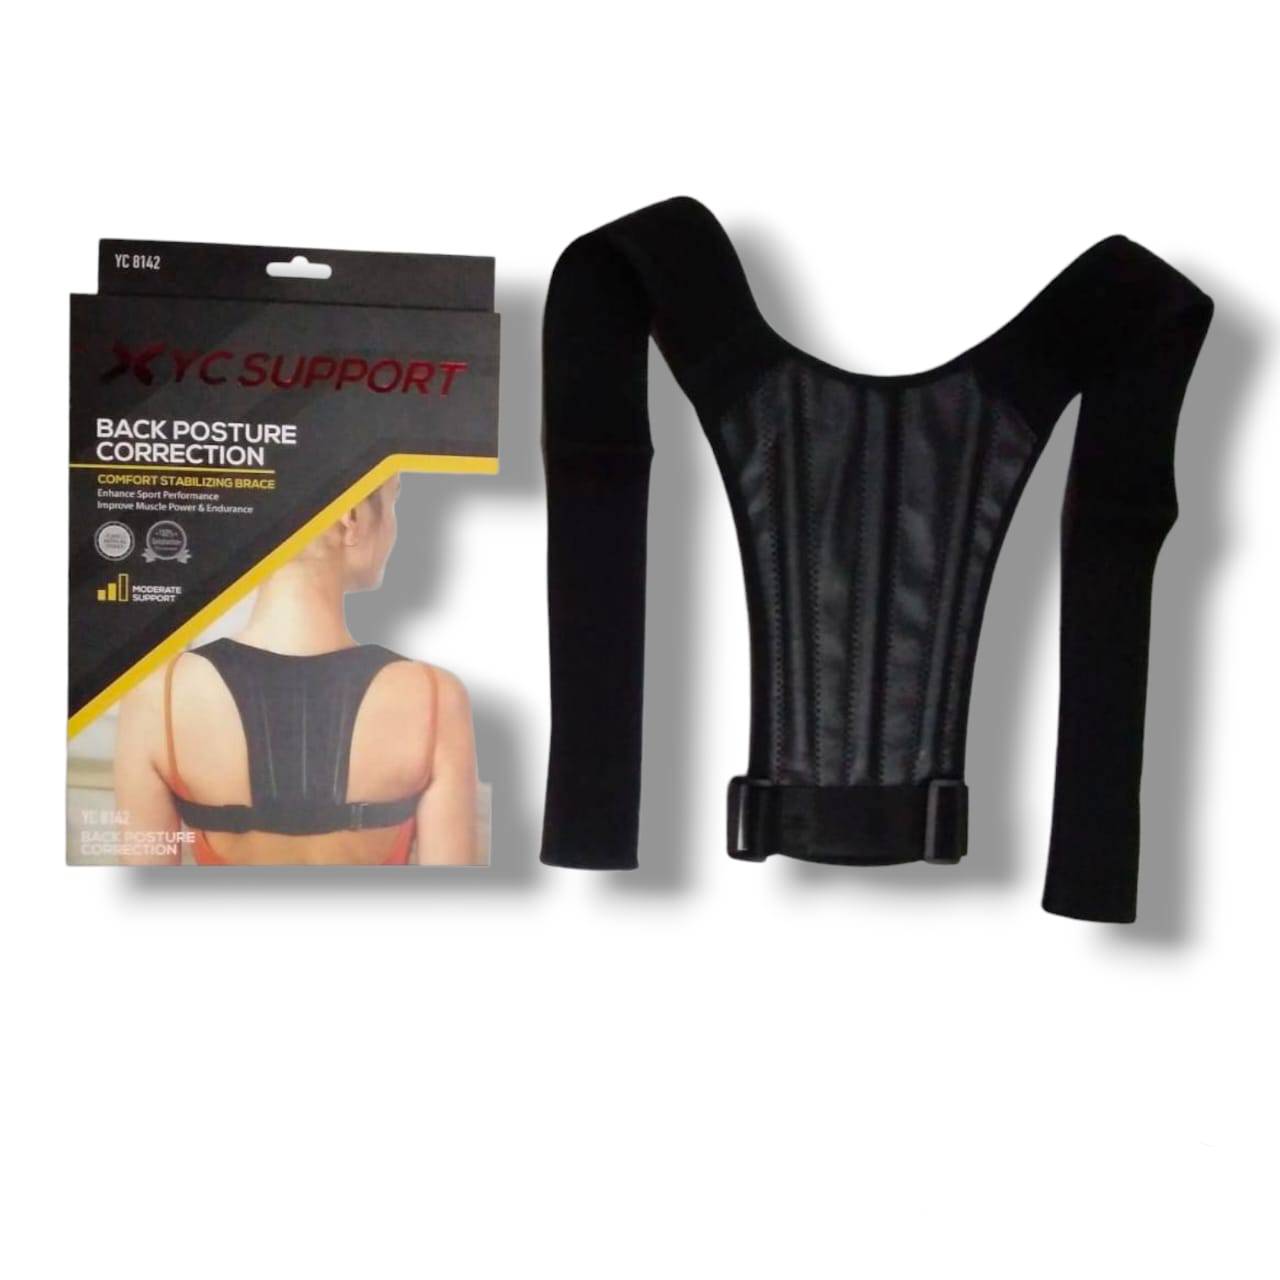 YC Support Back Posture Correction - Valetica Sports